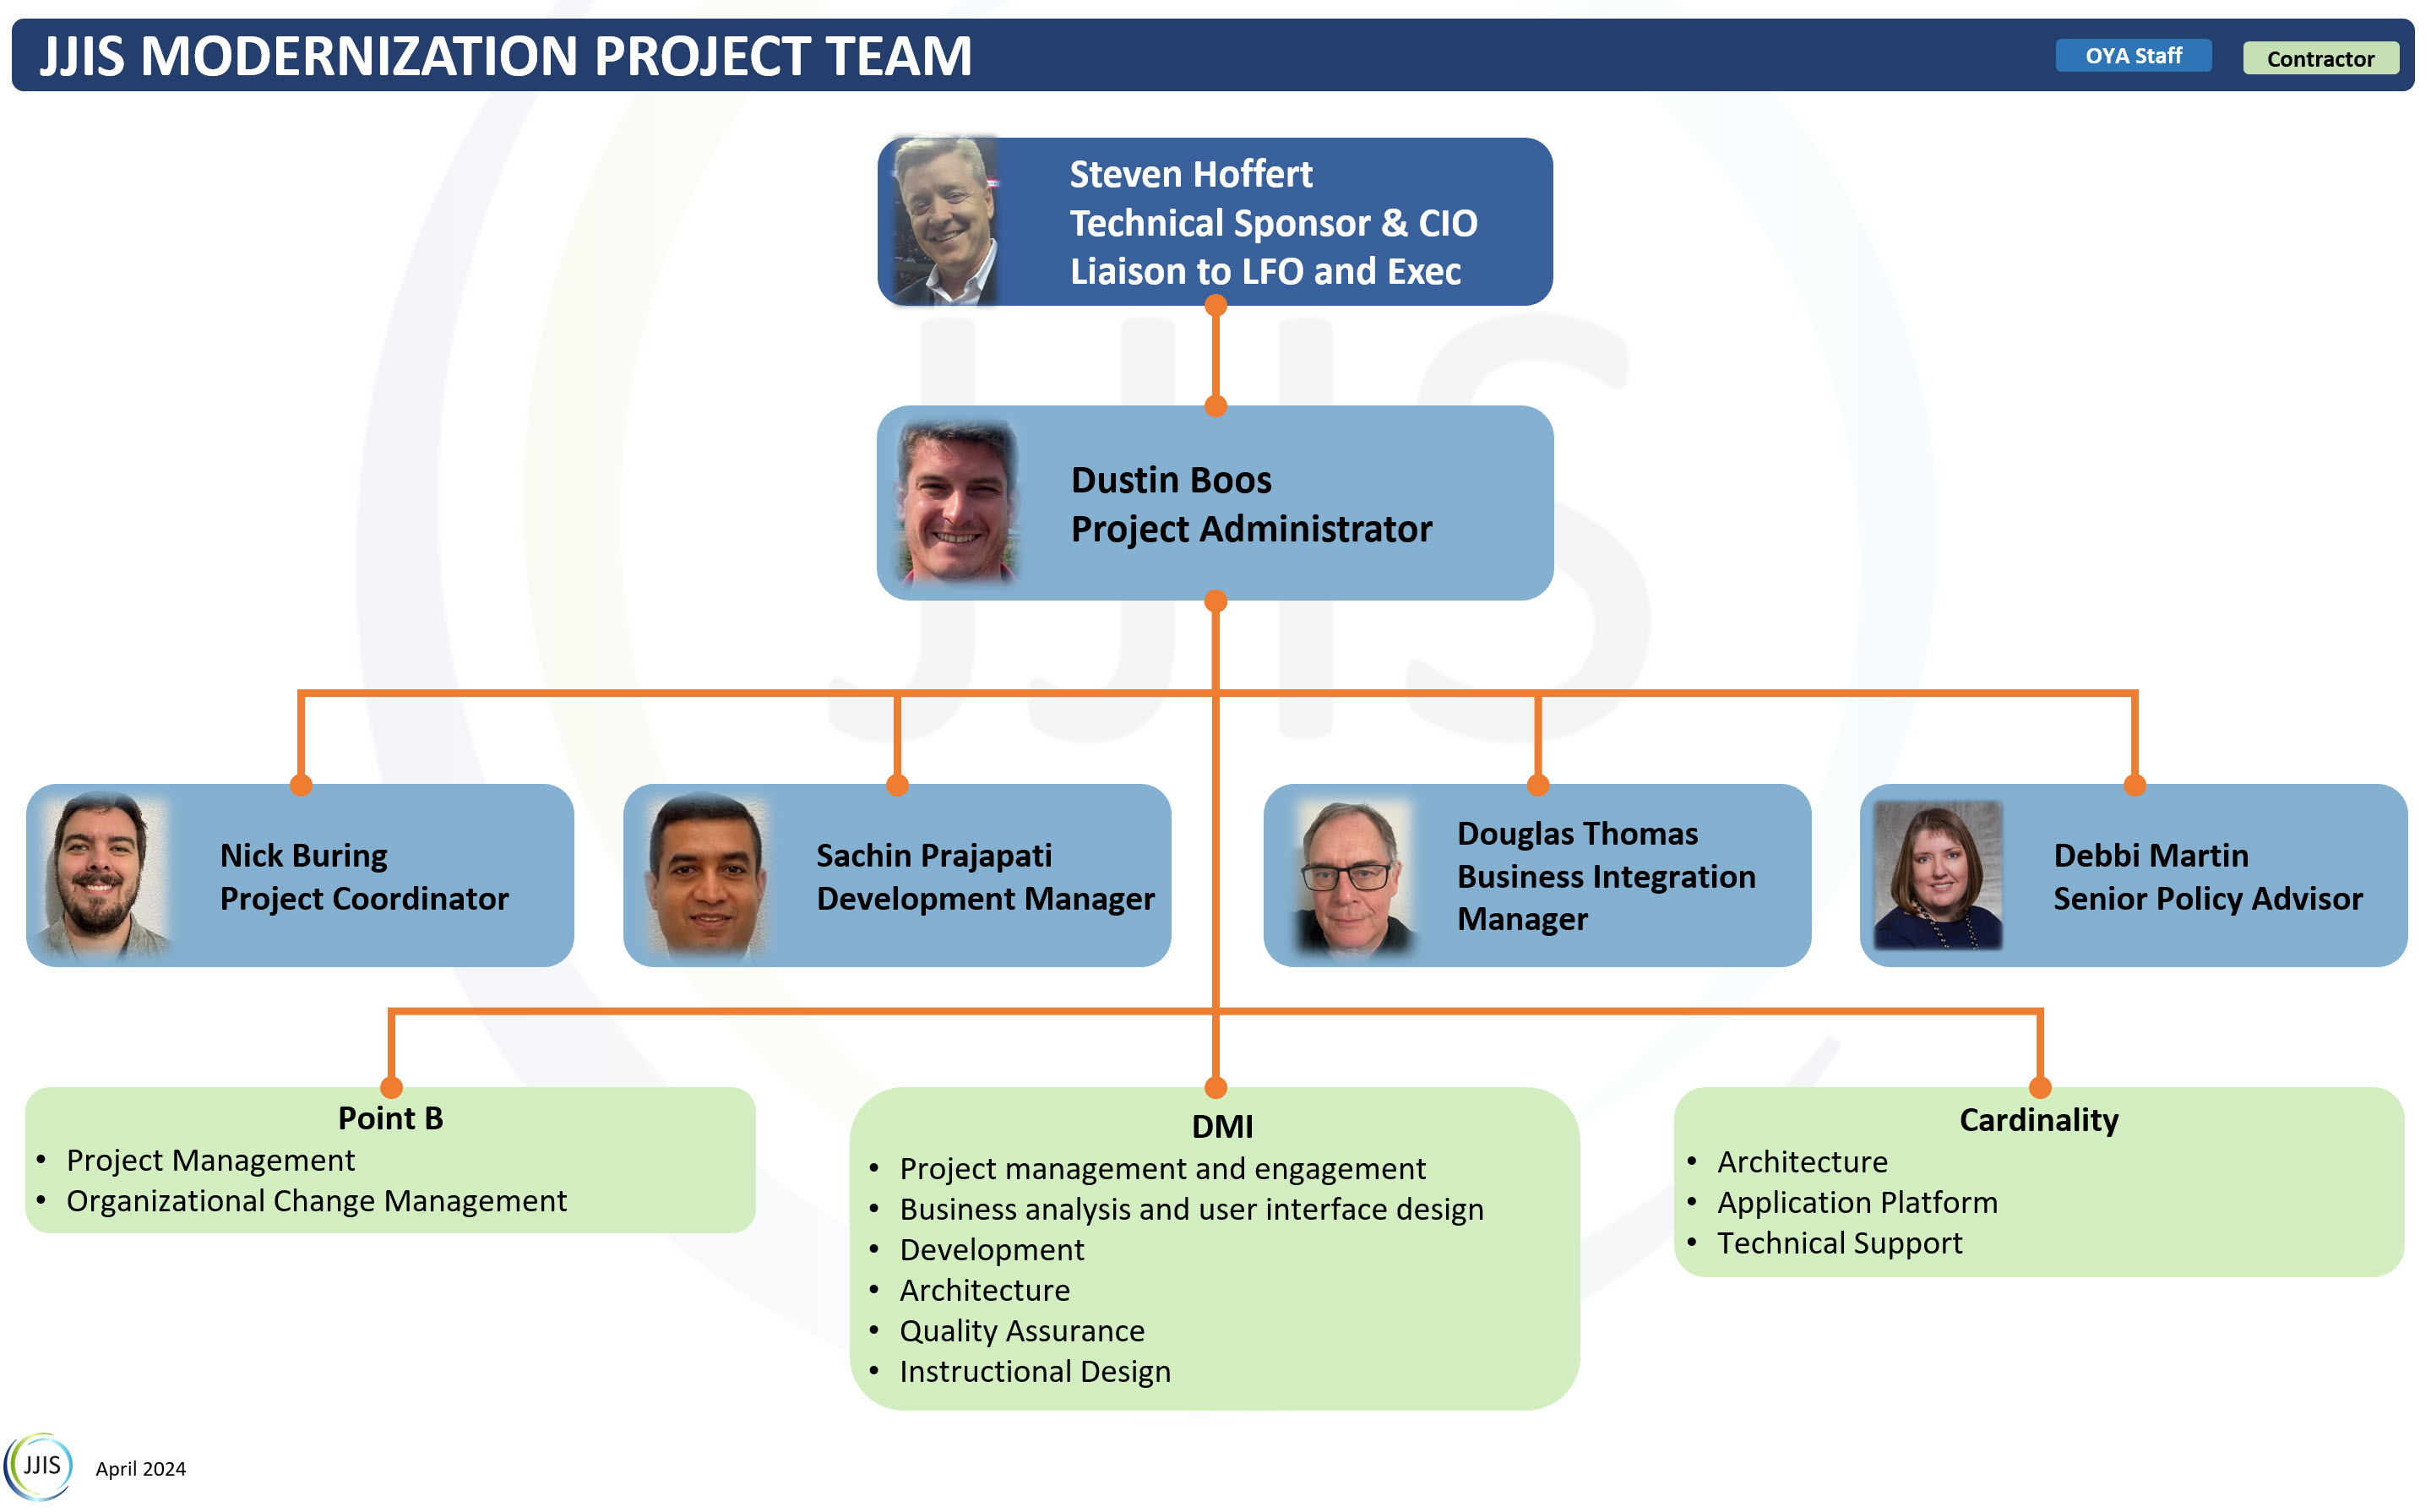 Org chart showing the people involved in the JJIS Modernization project team